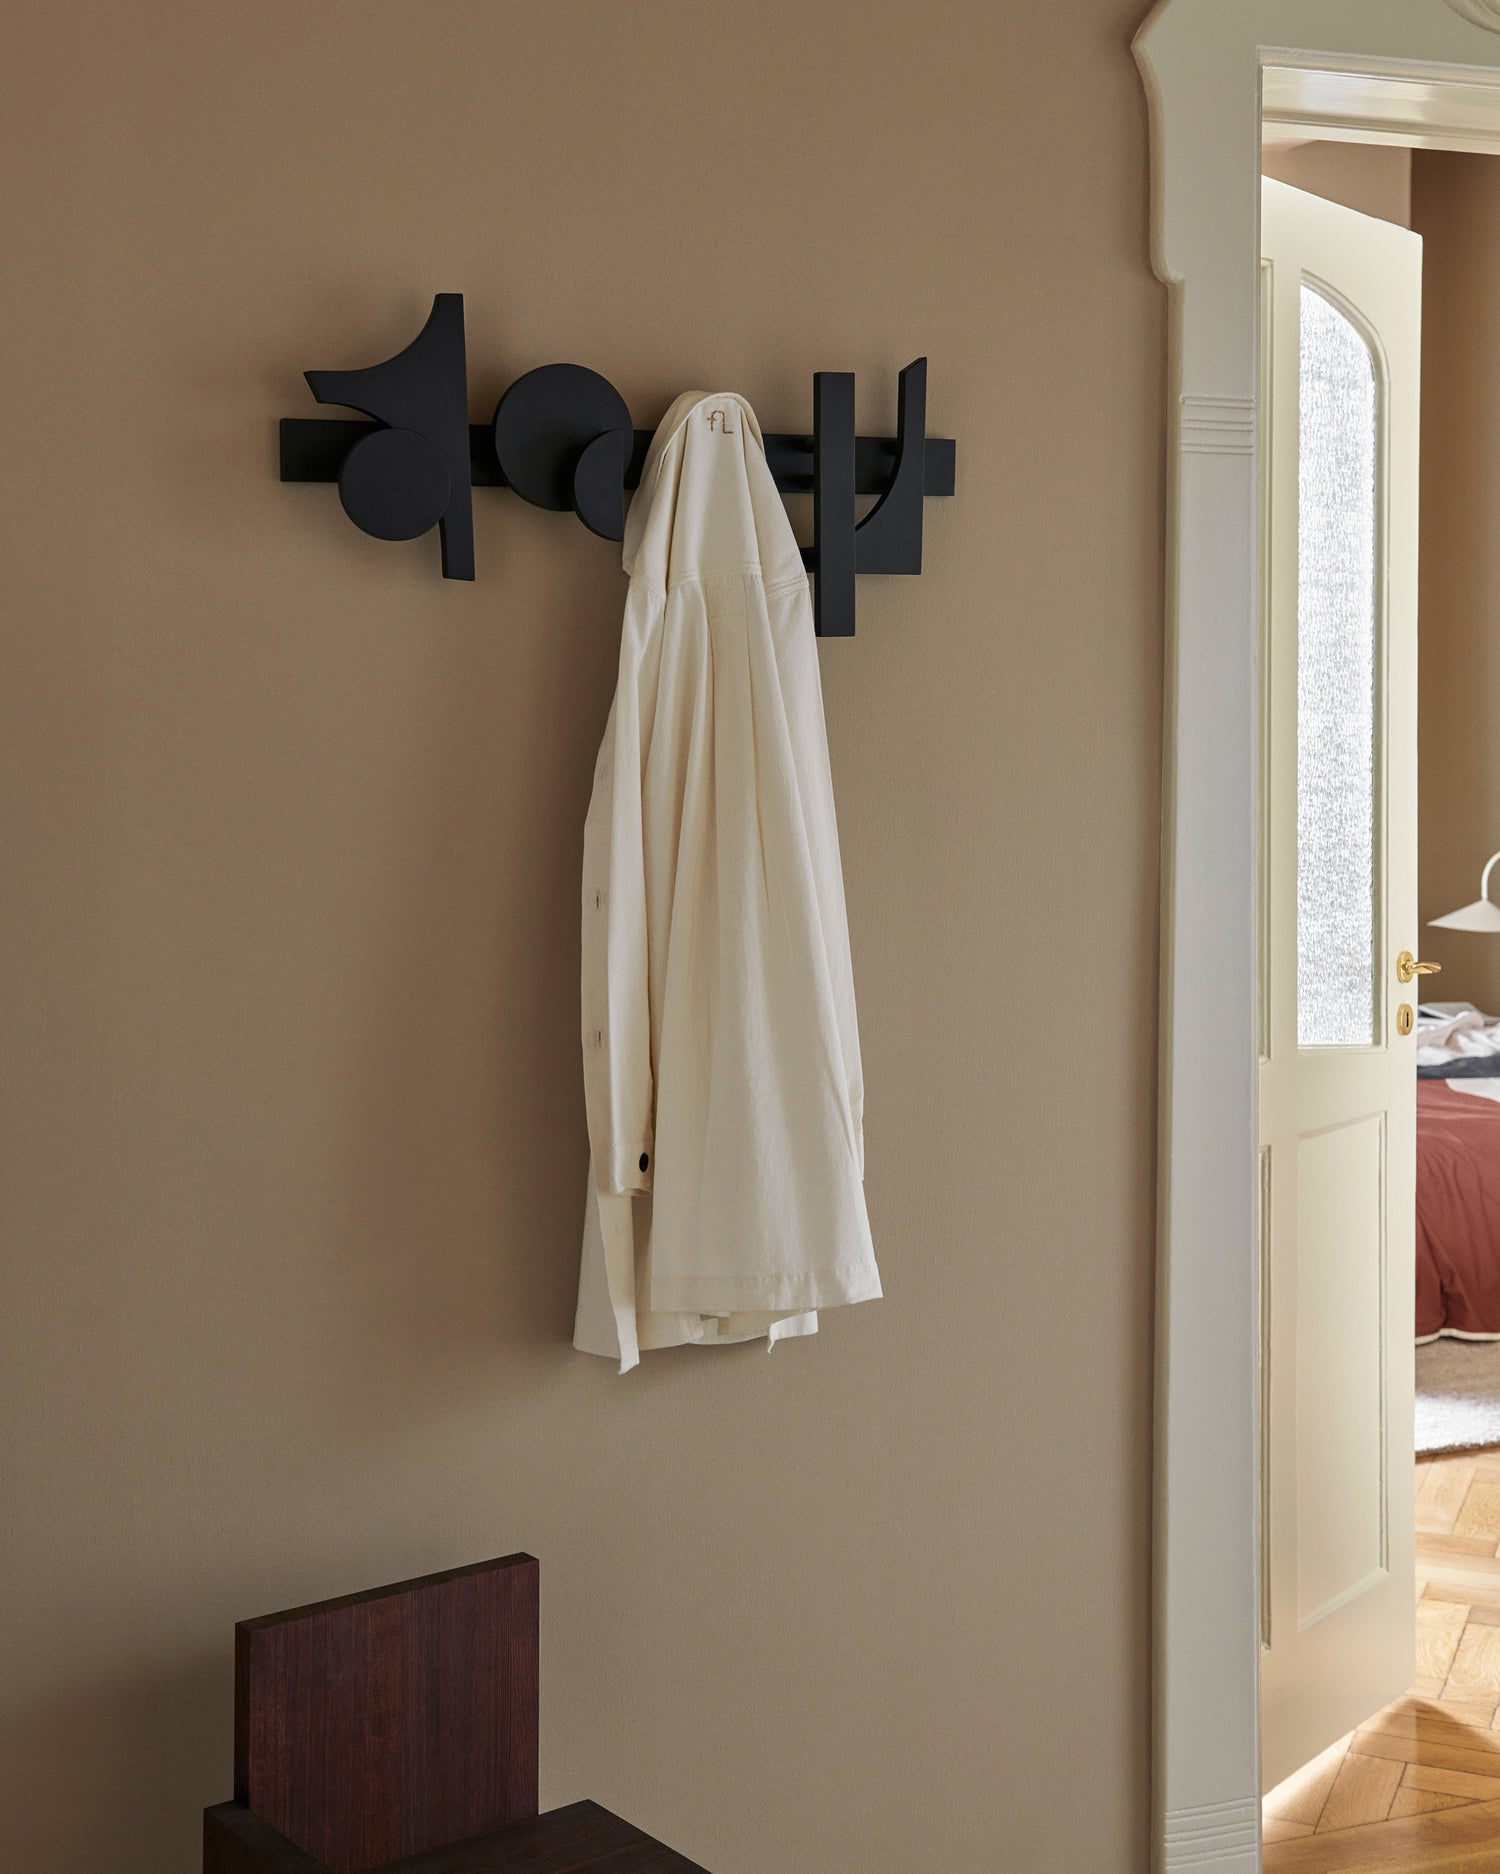 Cupe Wall Rack - Black